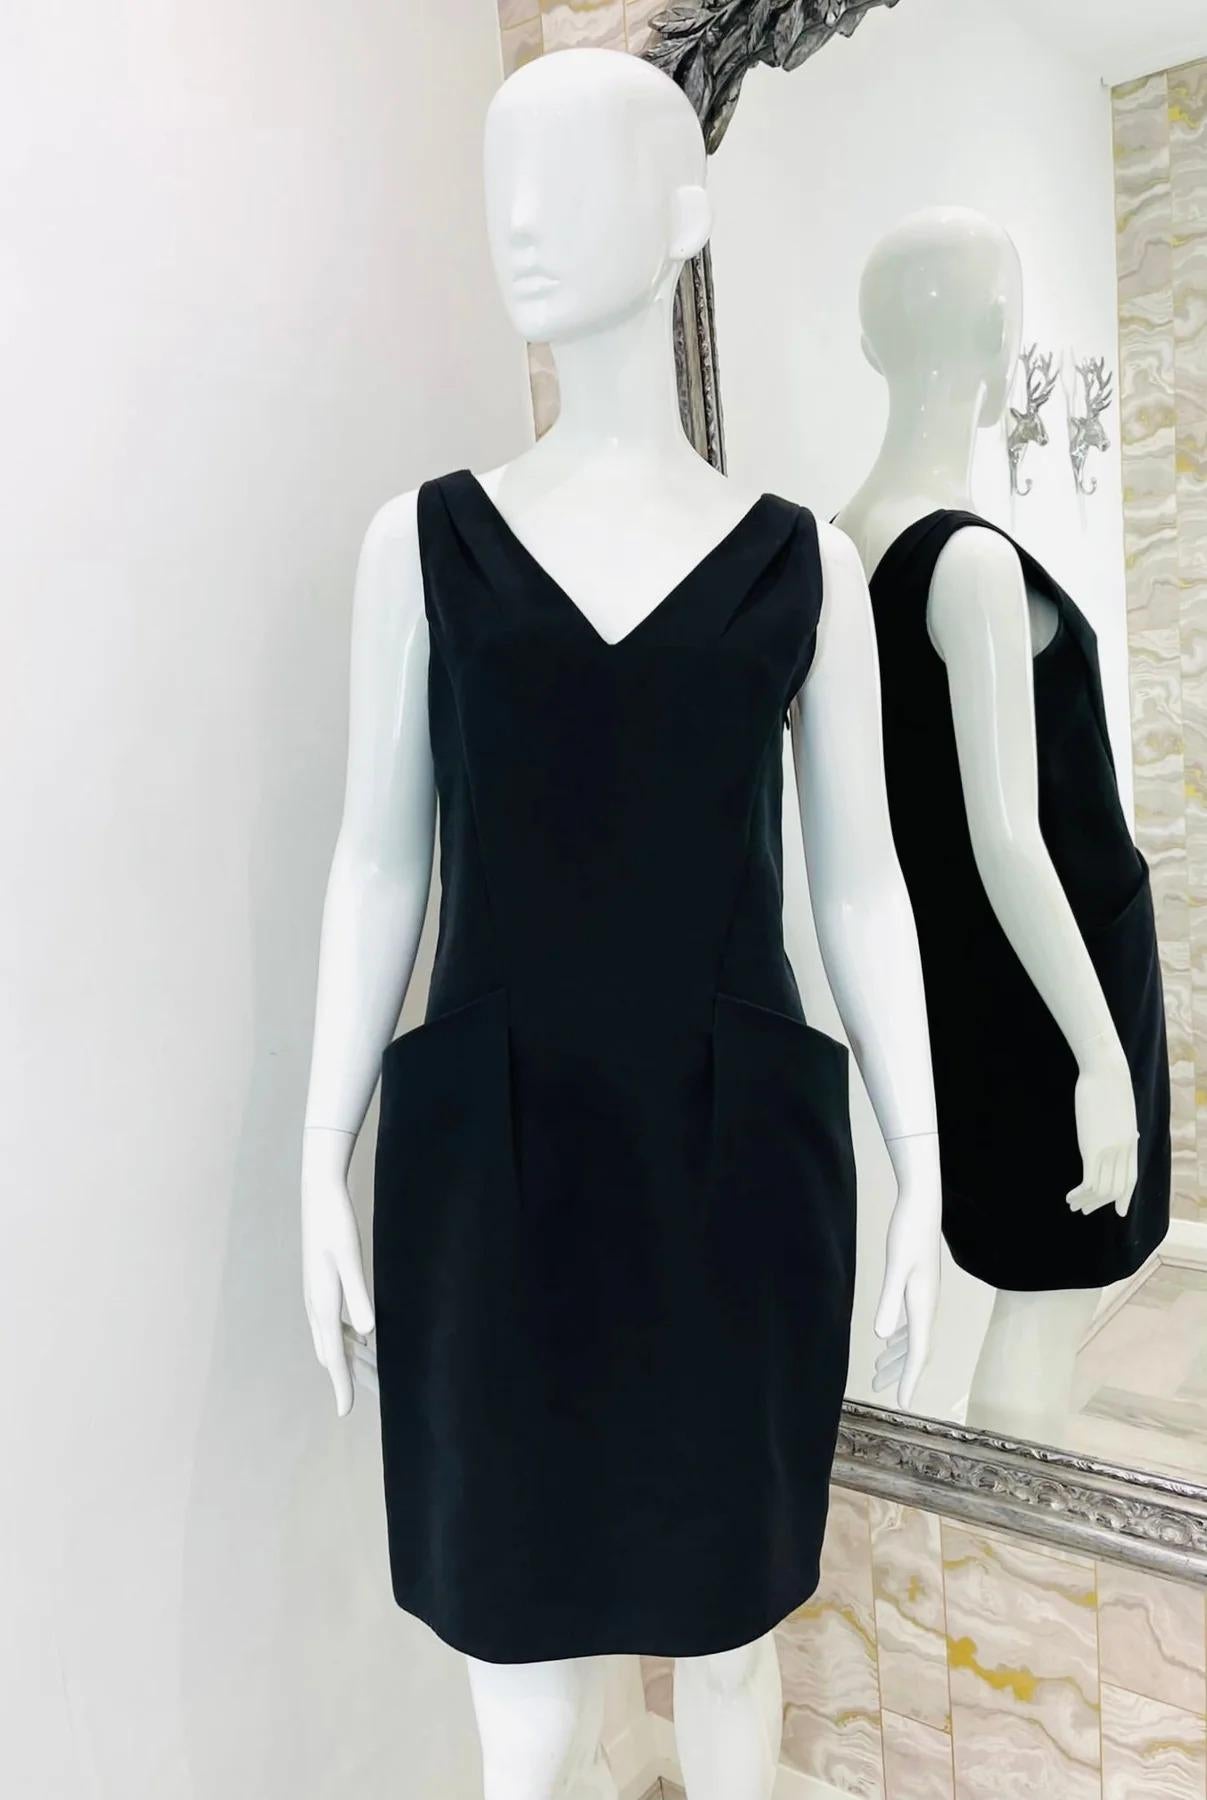 Prada Cotton Sleeveless Dress

Black pinafore style dress with hip pockets.

Additional information:
Size – 40IT
Composition – Cotton
Condition – Very Good